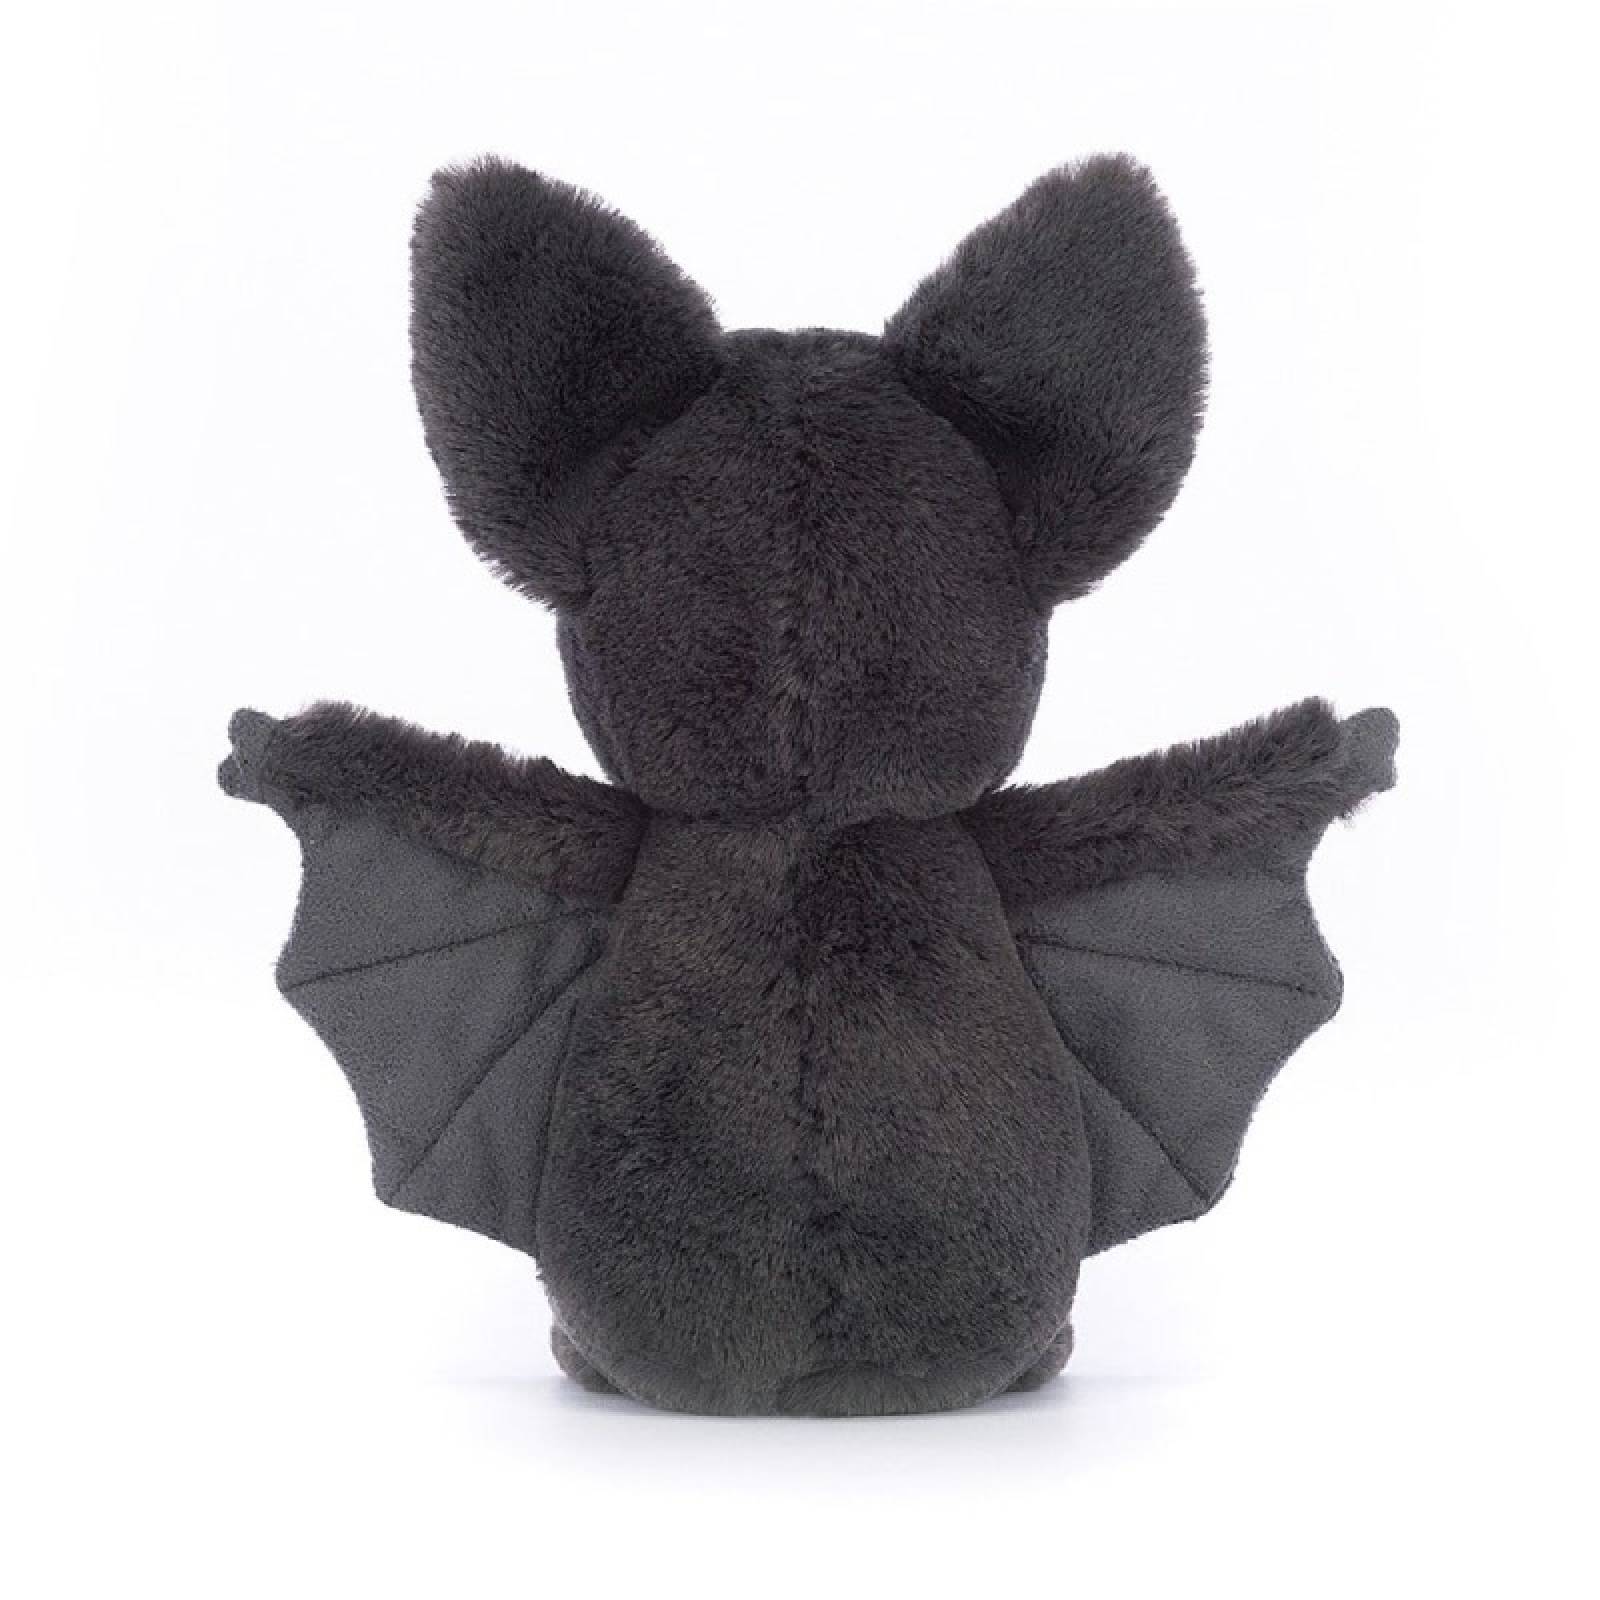 Ooky Bat Soft Toy By Jellycat 0+